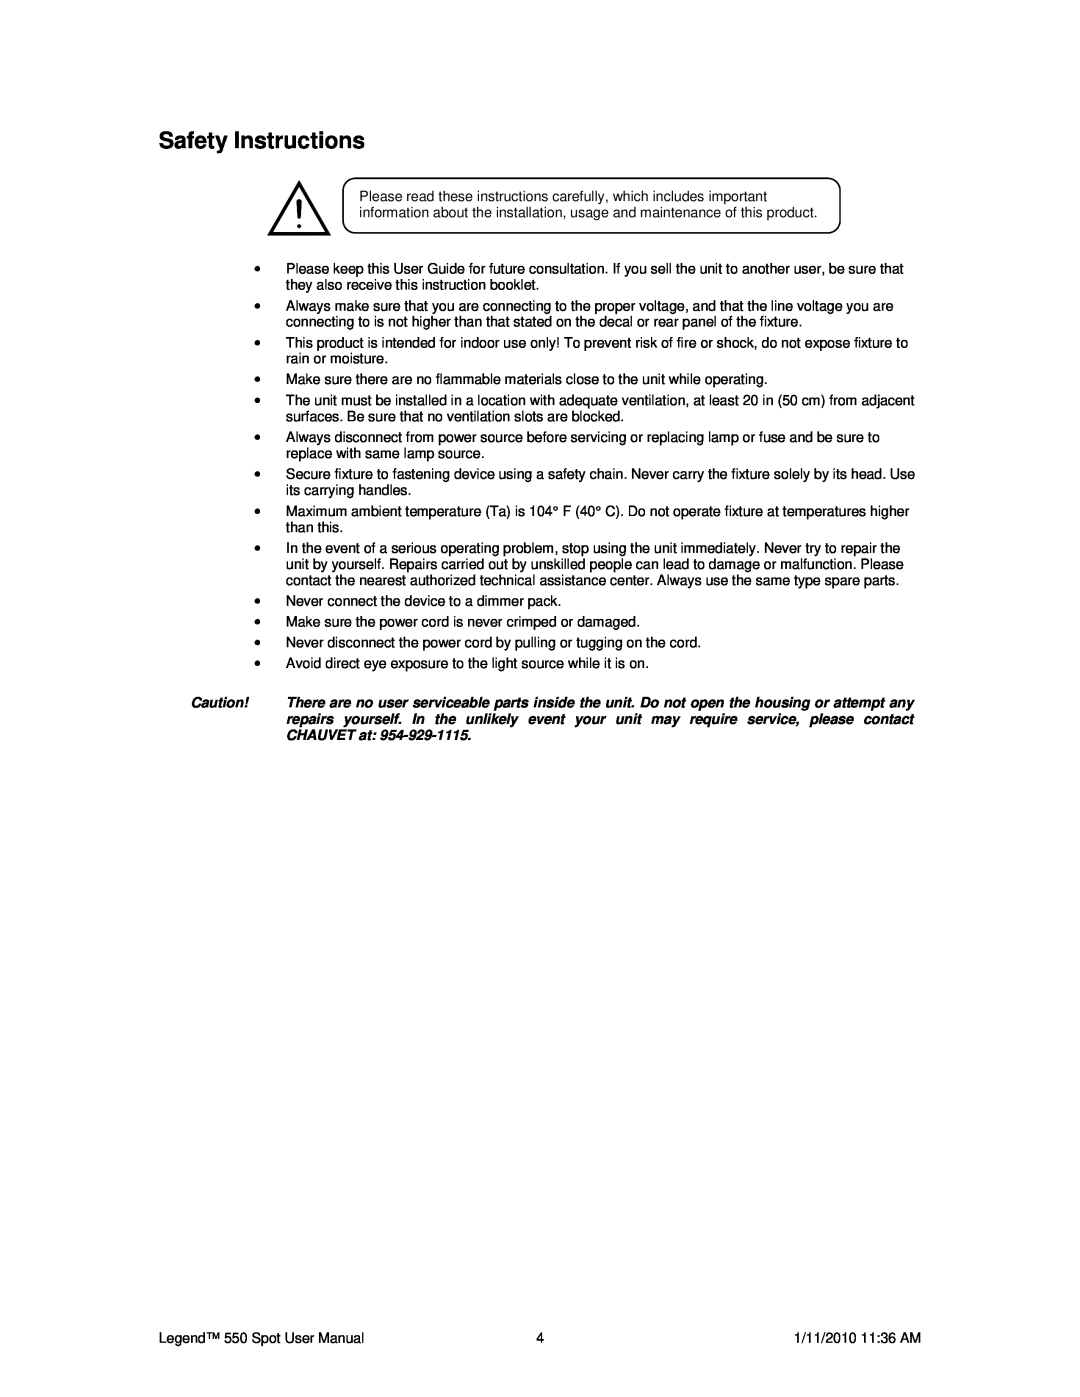 Chauvet 550 user manual Safety Instructions, CHAUVET at 